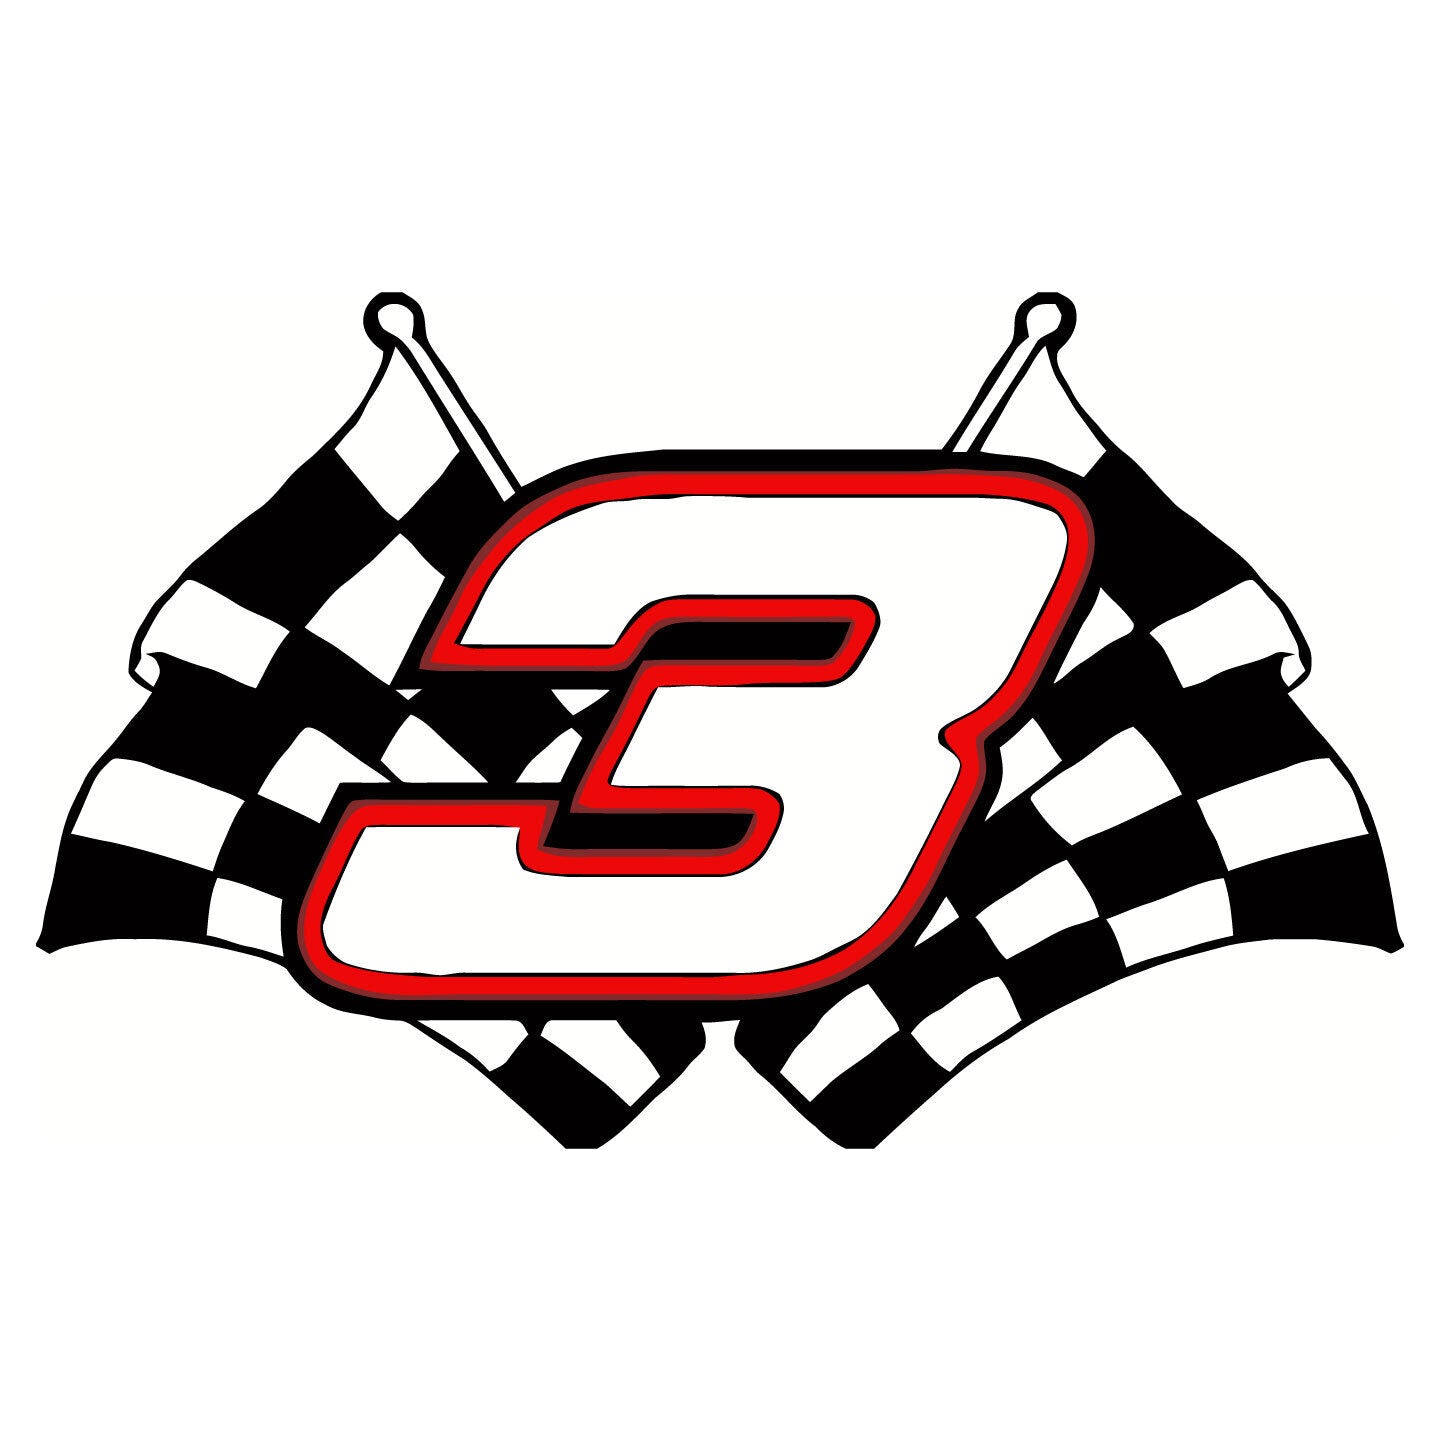 Nascar 3 Dale Earnhardt Decal- Car Decal Small to X Large